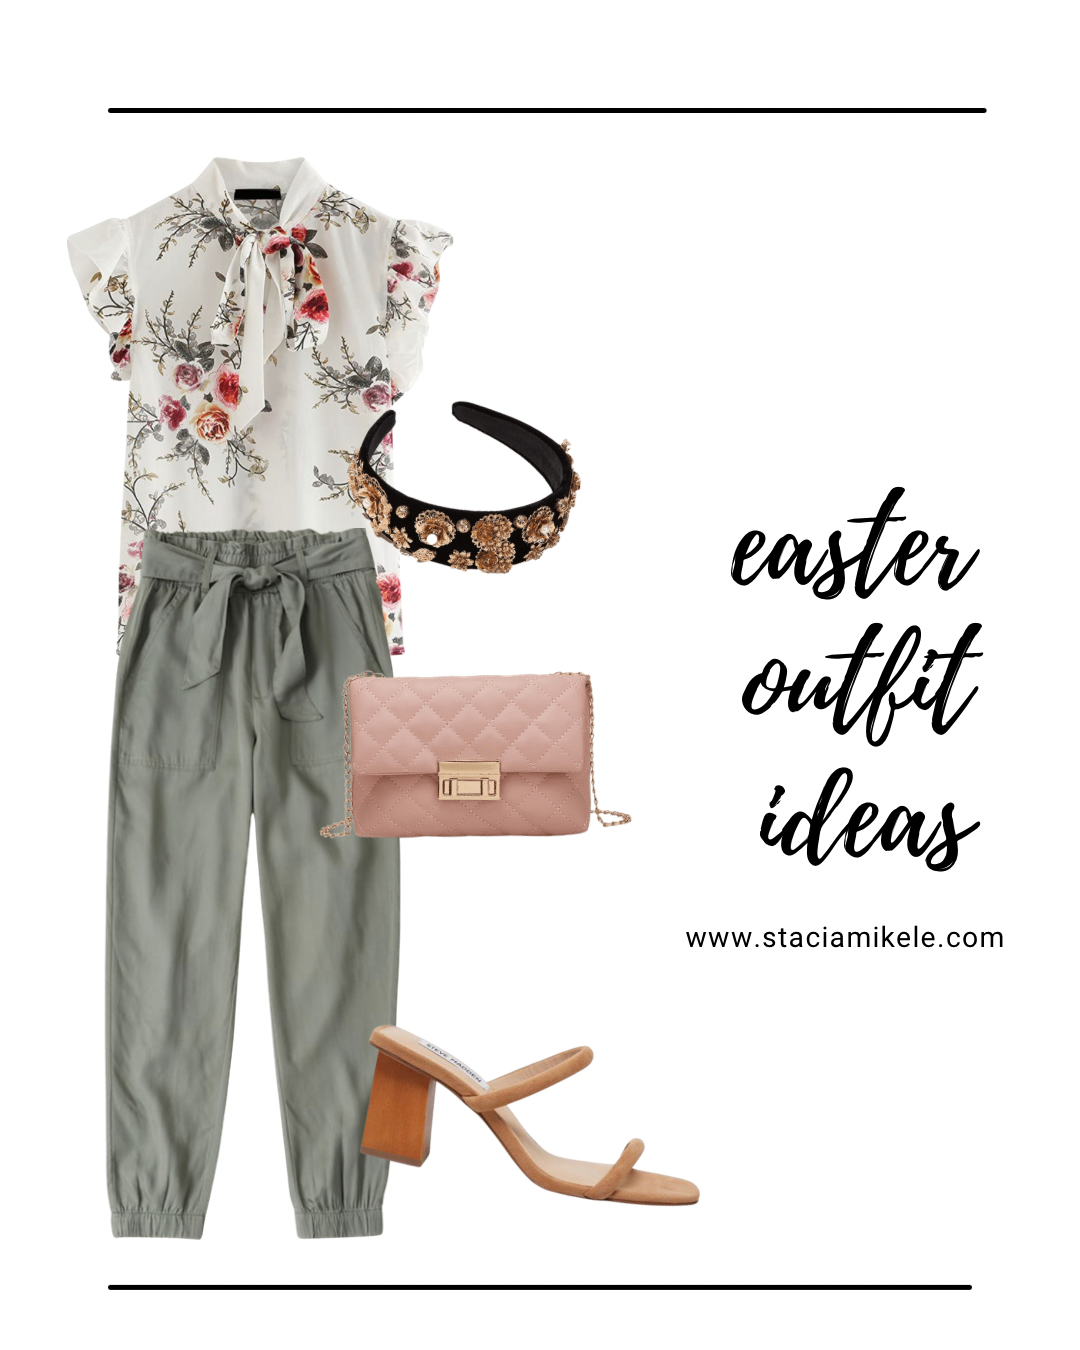 amazon floral top easter outfit ideas for 2021